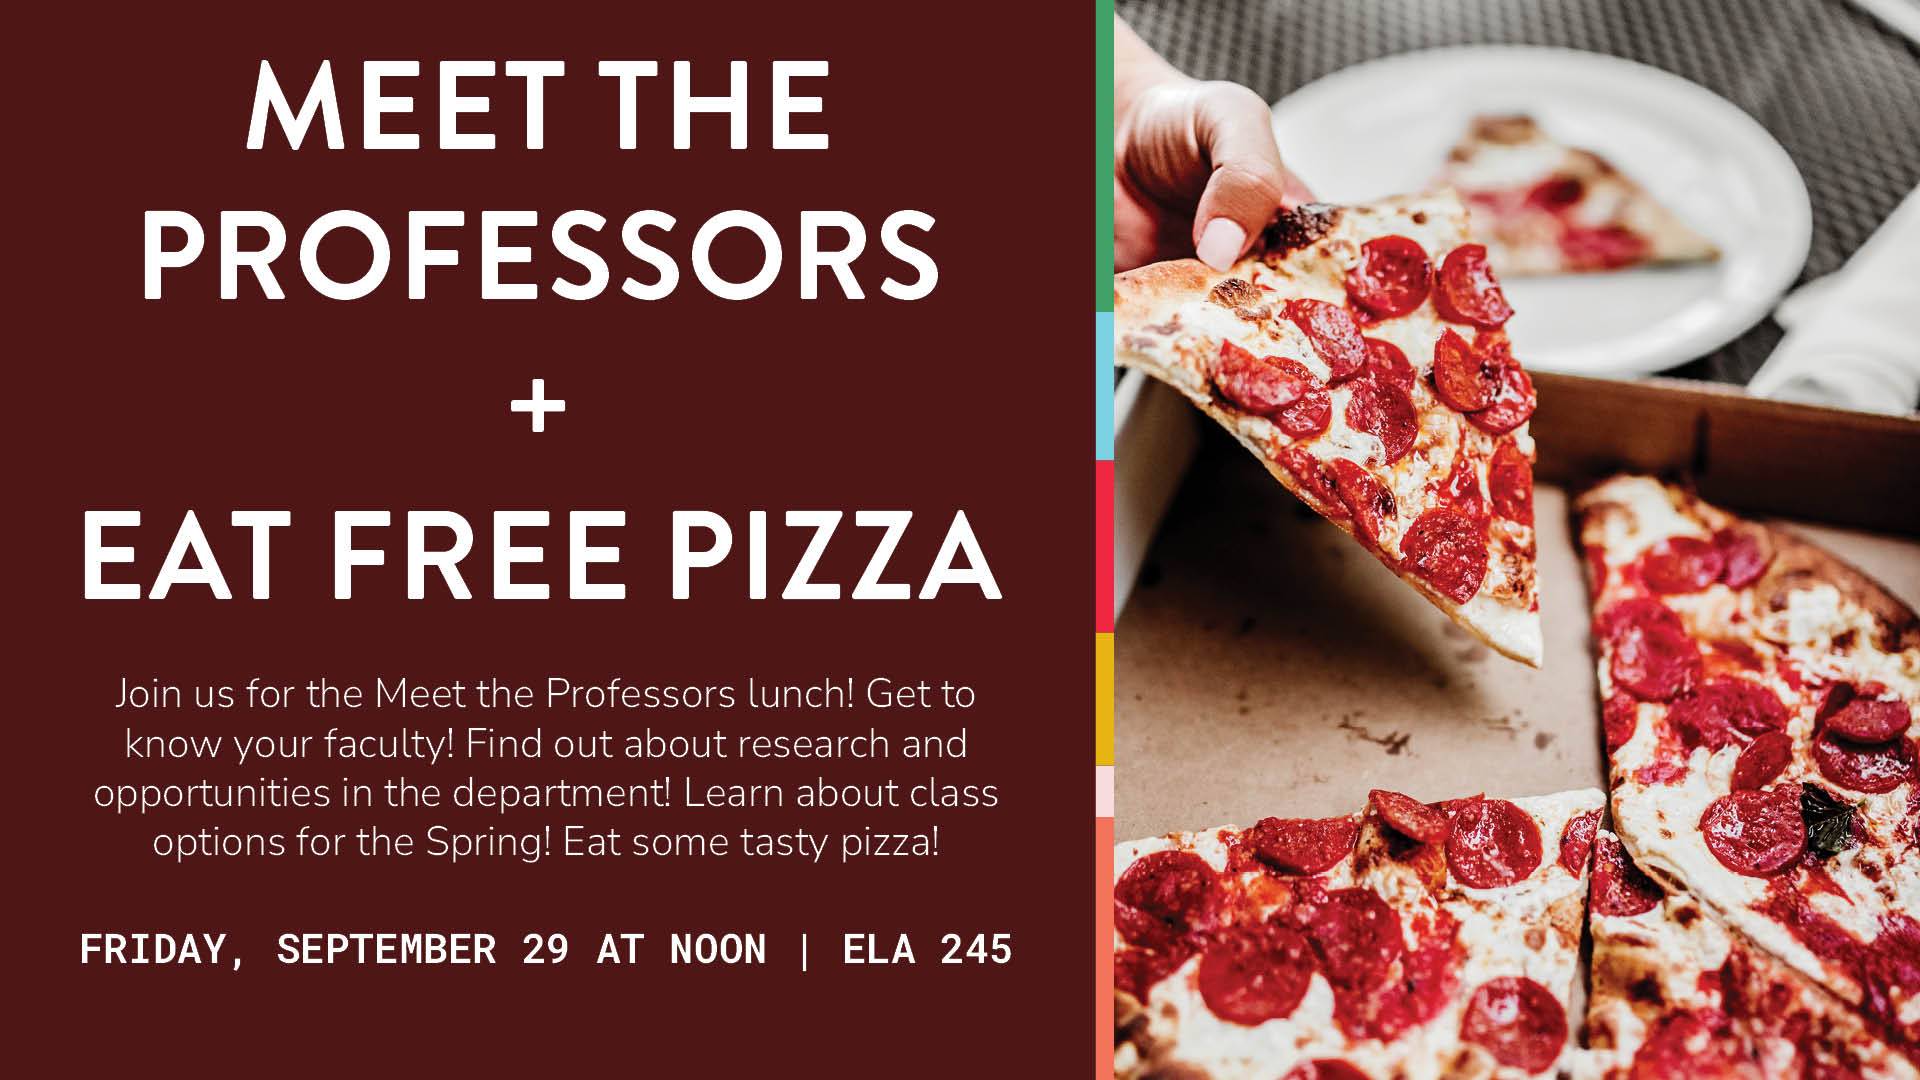 Meet the professors and Pizza